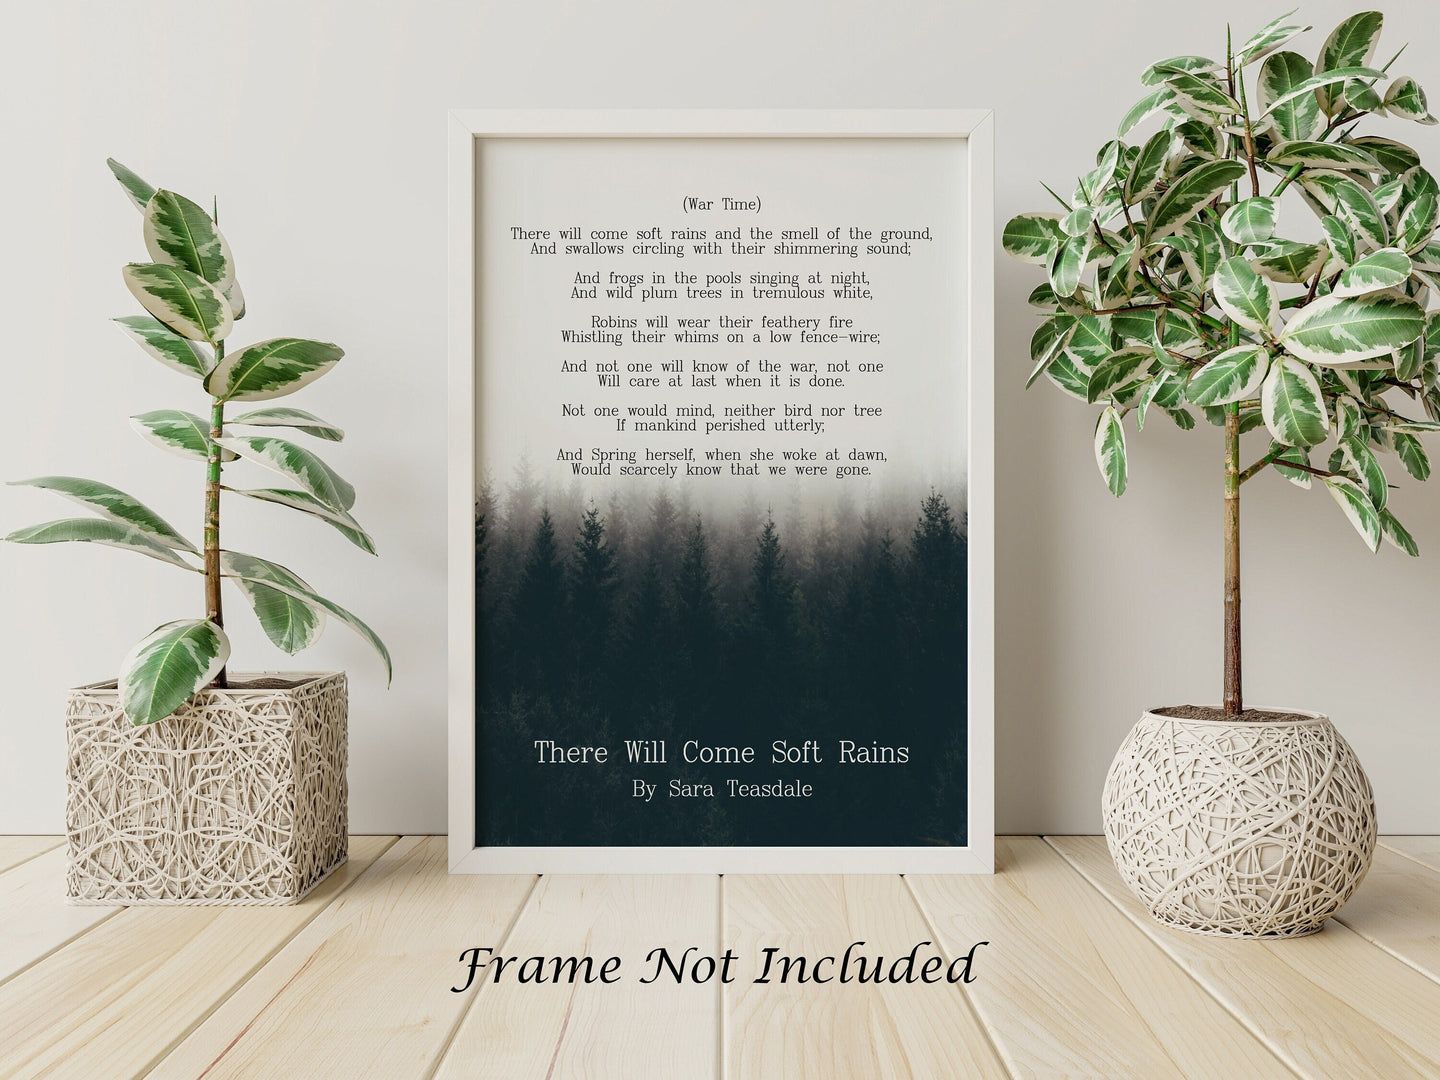 There Will Come Soft Rains Poetry Print - Sara Teasdale Poem Wall Art - Physical Print Without Frame